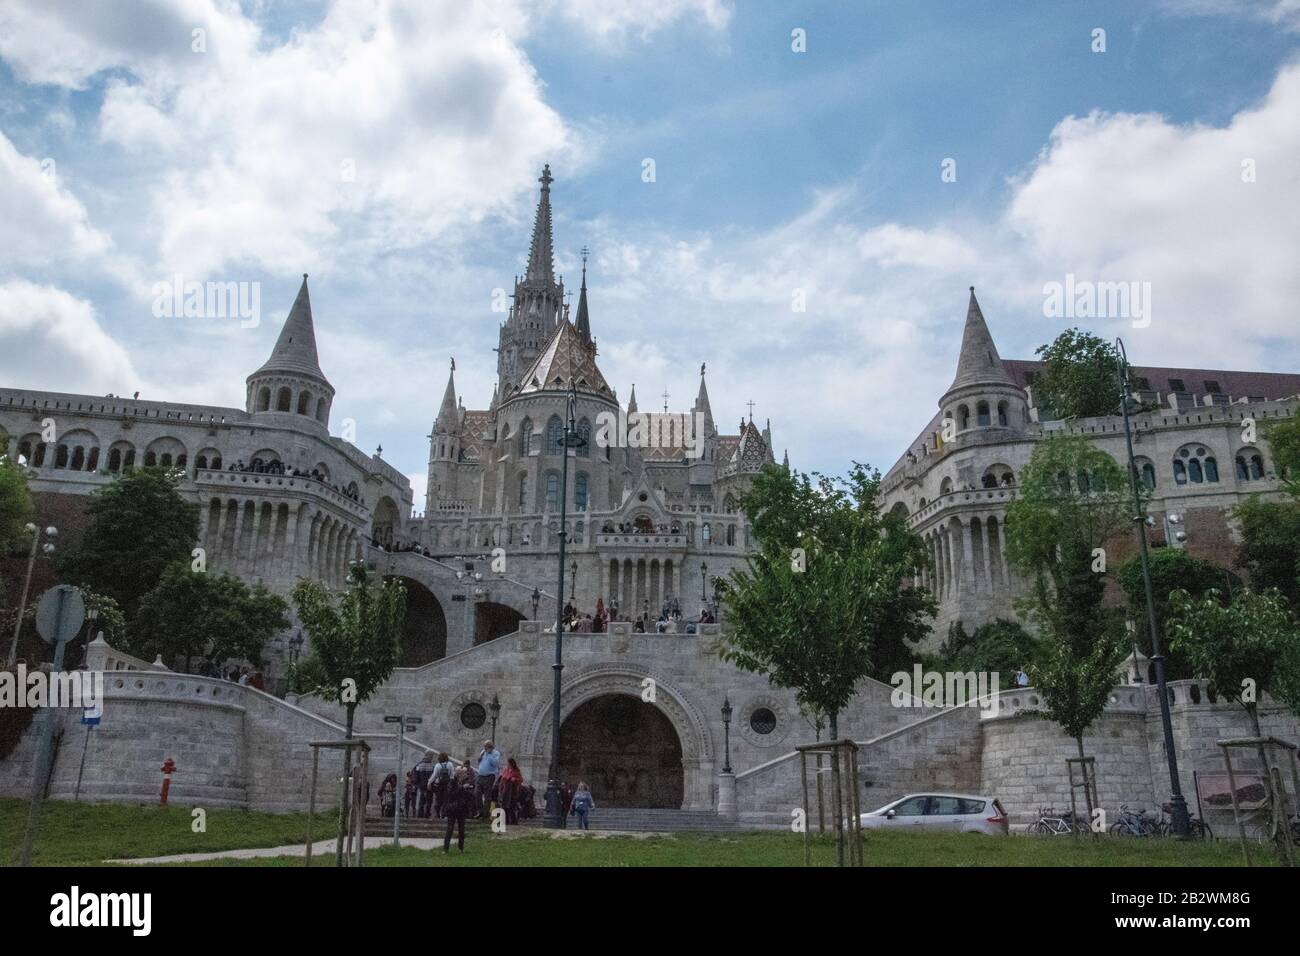 Tourists at the Halászbástya or Fisherman's Bastion is one of the best known monuments in Budapest, Hungary. Stock Photo